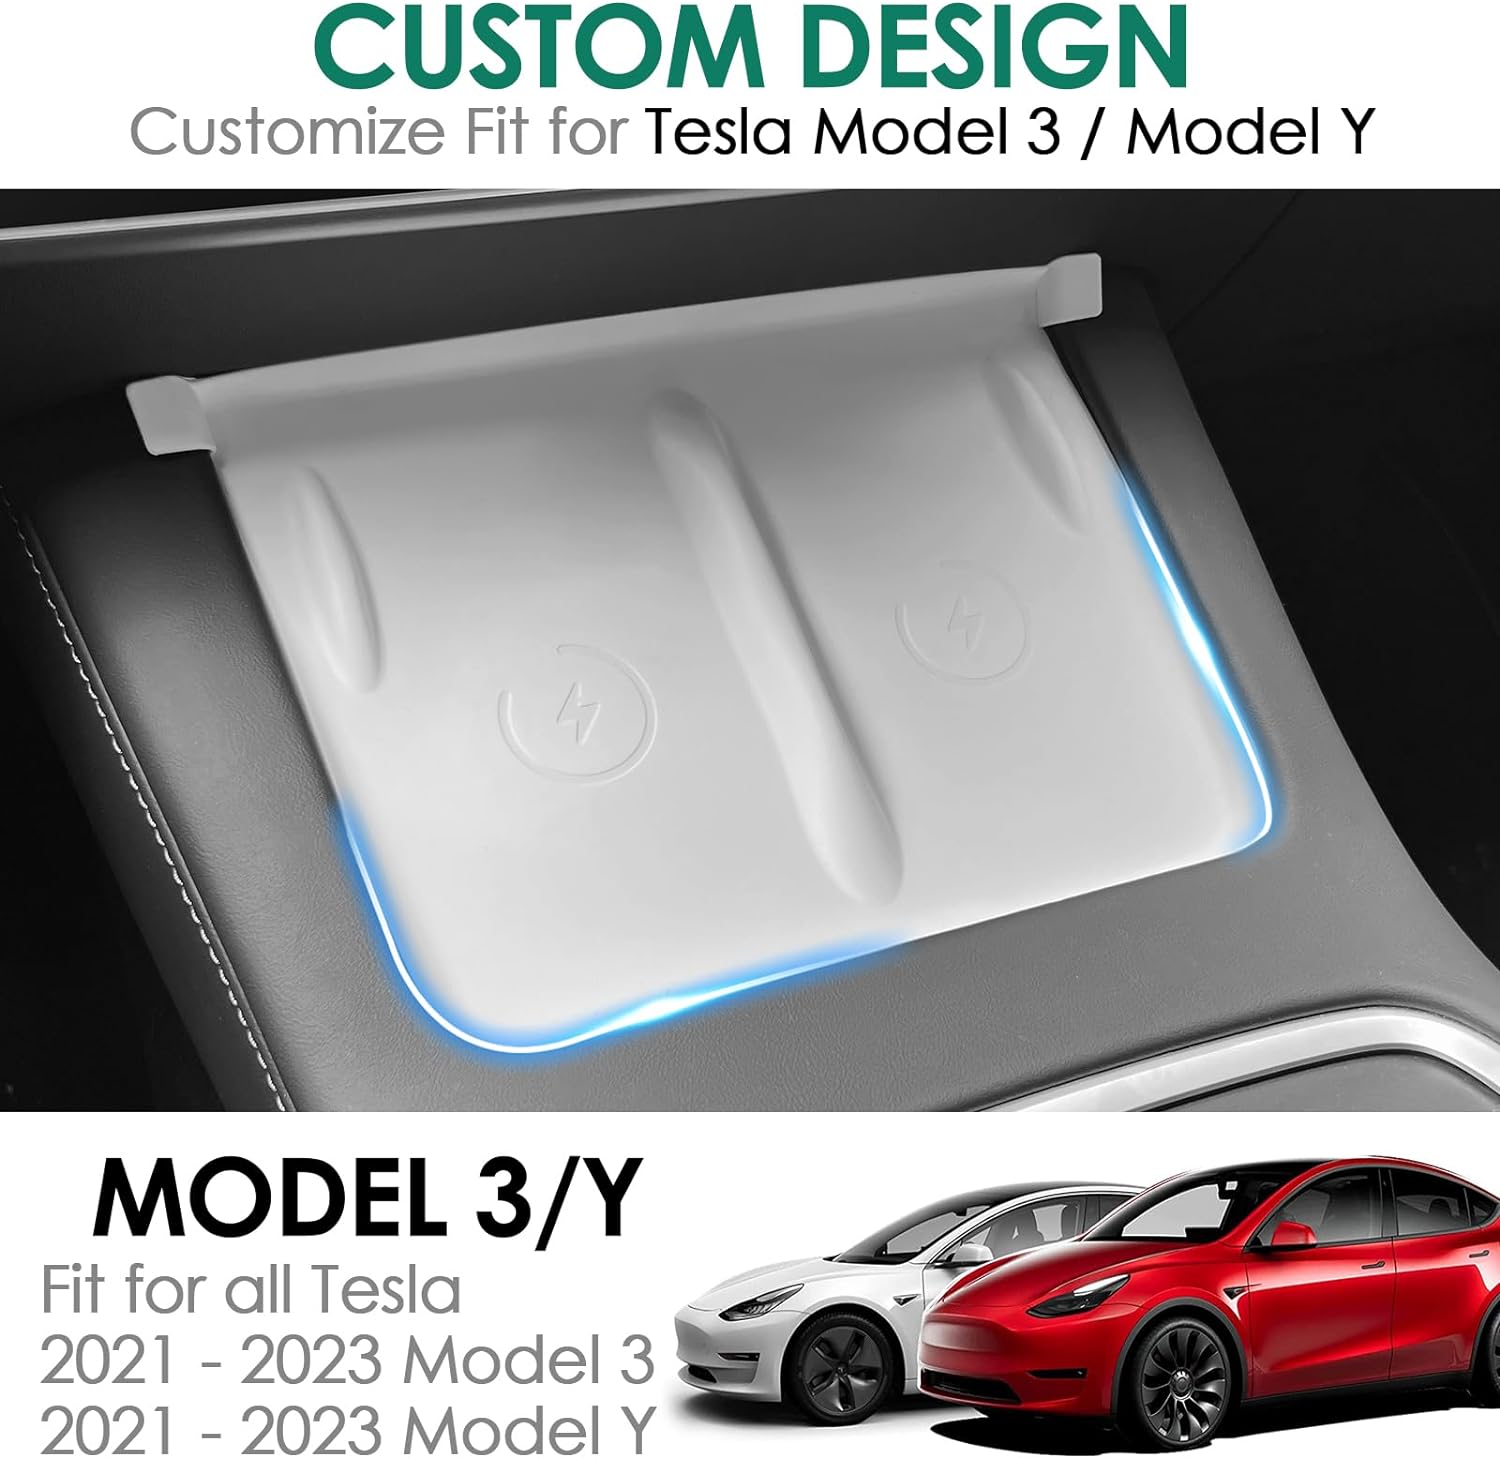 Center Console Wireless Charging Silicone Liner Protector For Model 3/Y